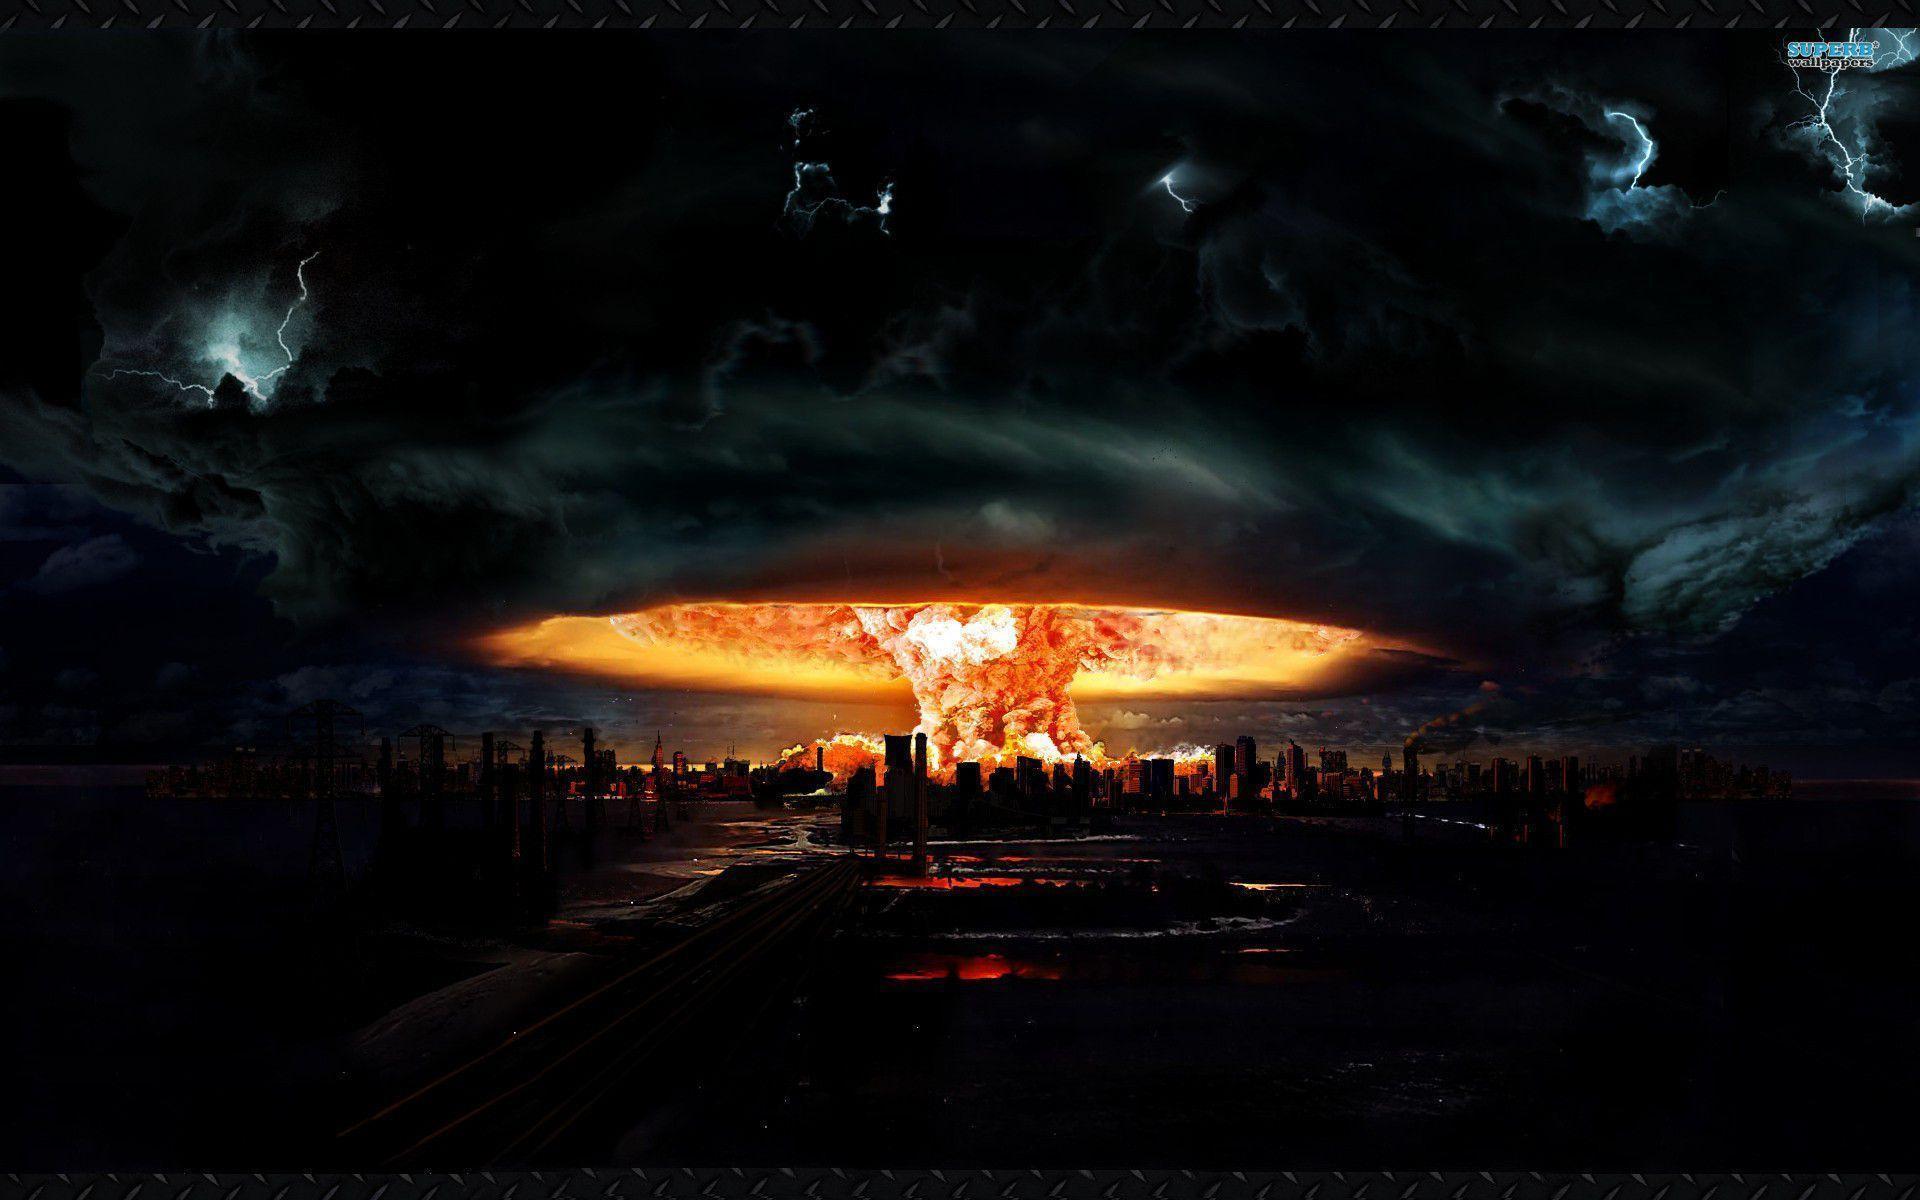 Gallery For Gt Atomic Explosion Wallpaper